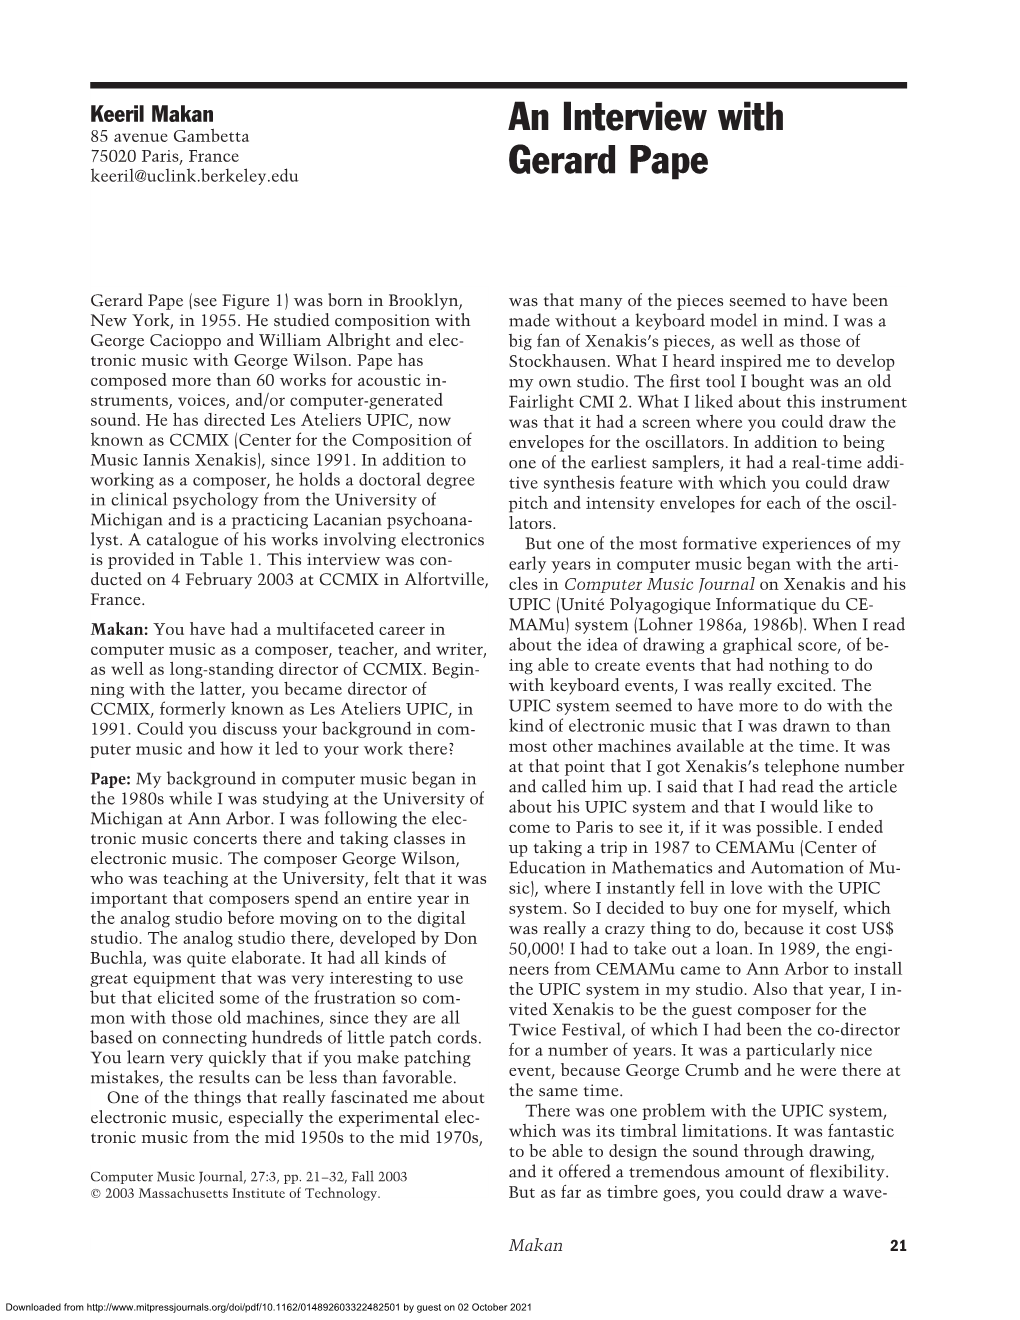 An Interview with Gerard Pape